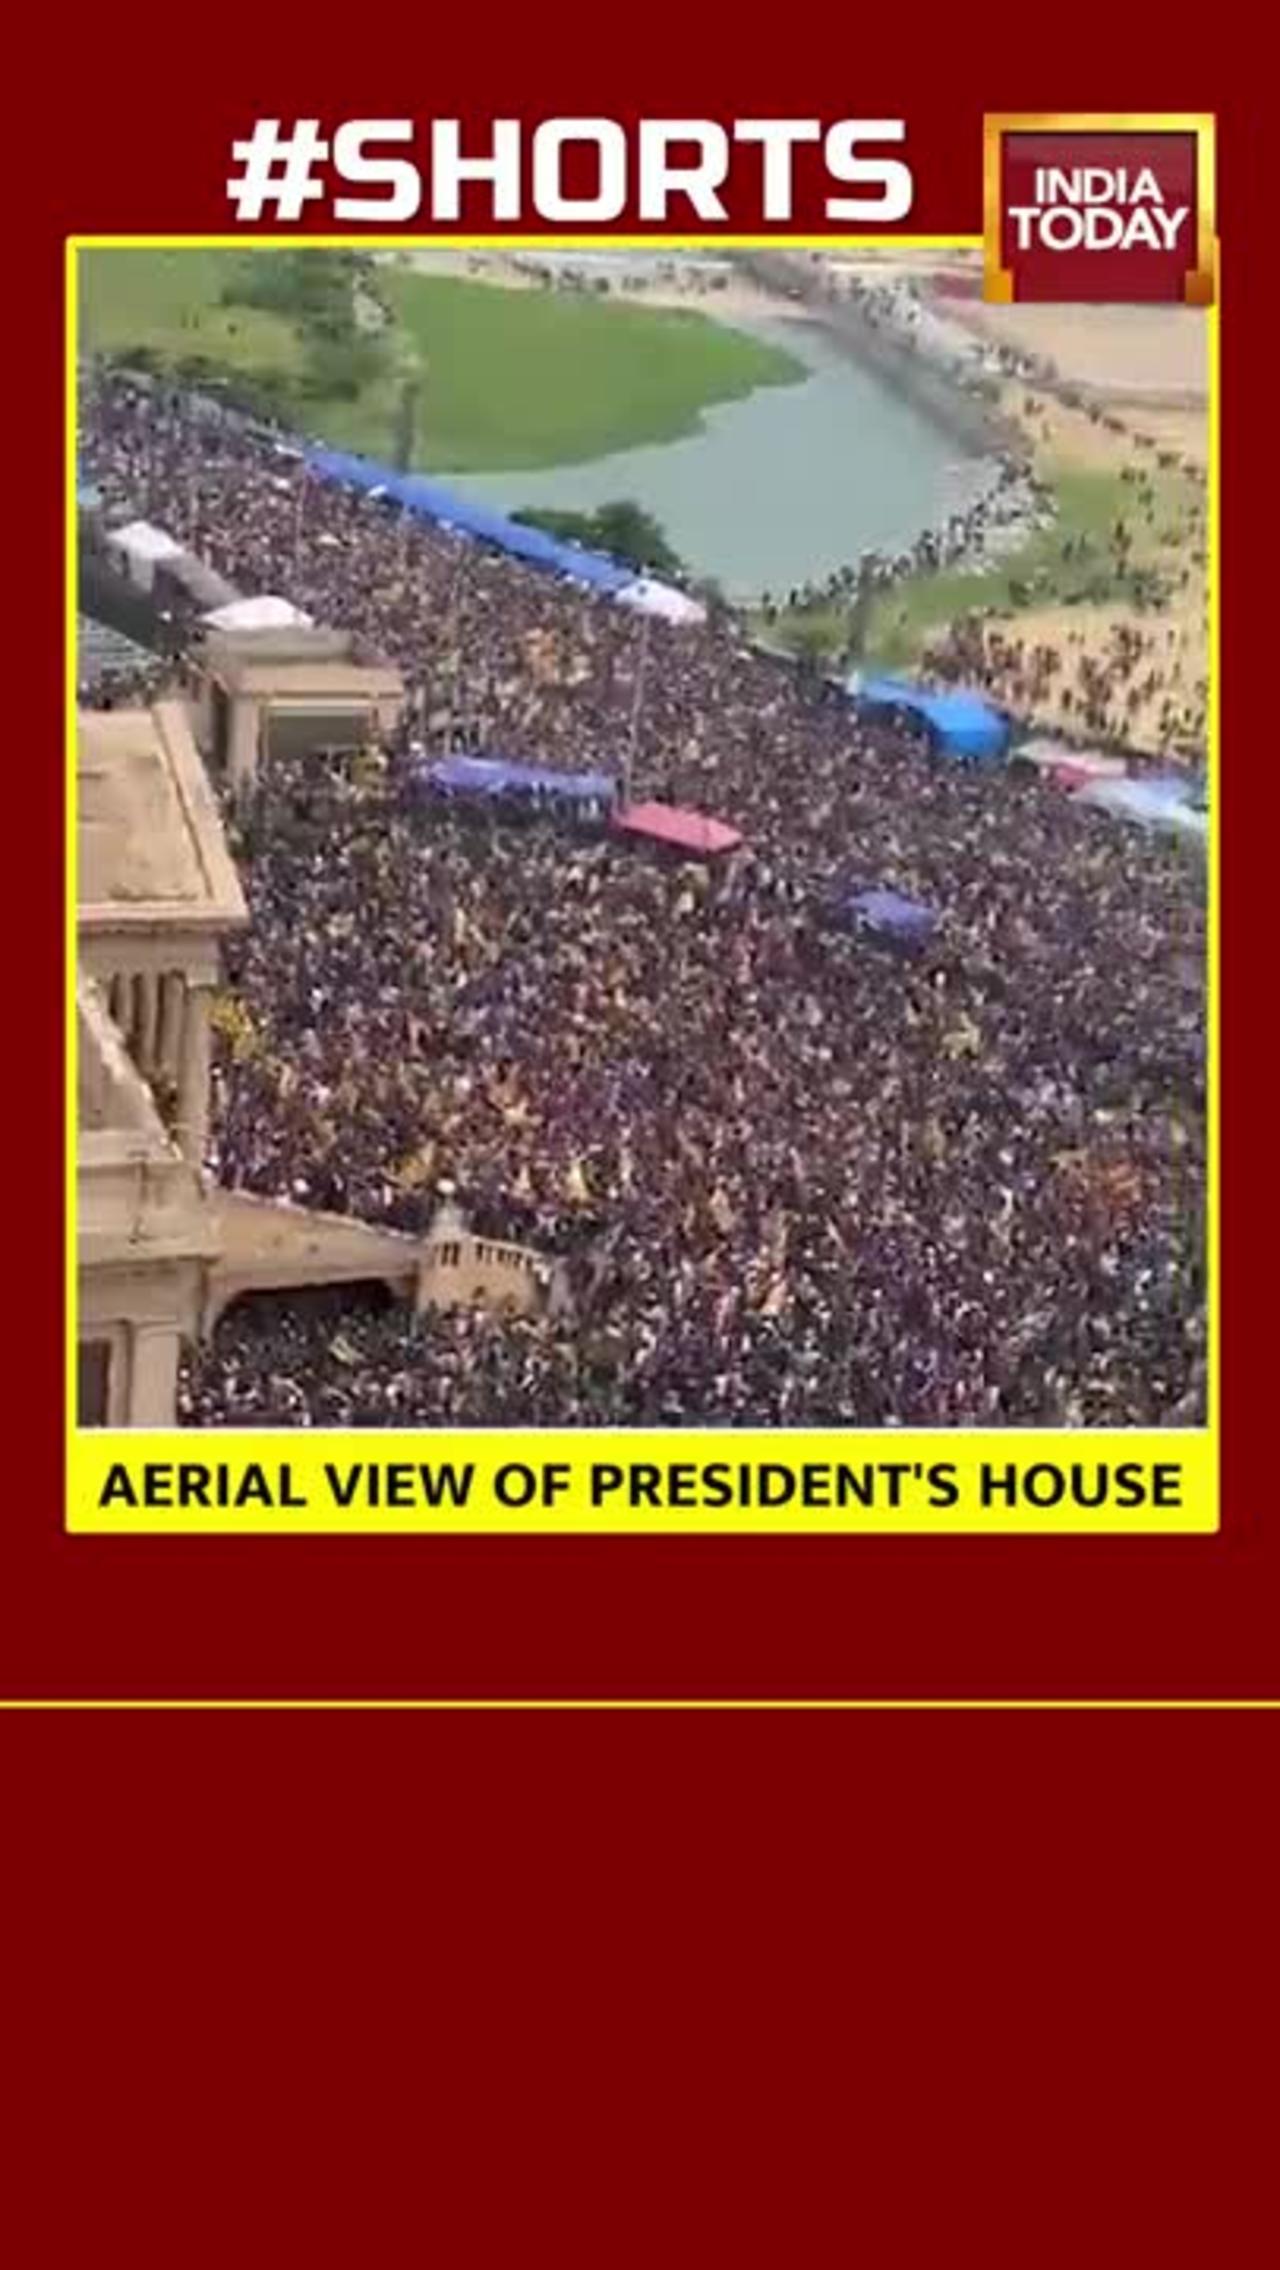 Areal view of Siri Lankan protests after storming the president's house.